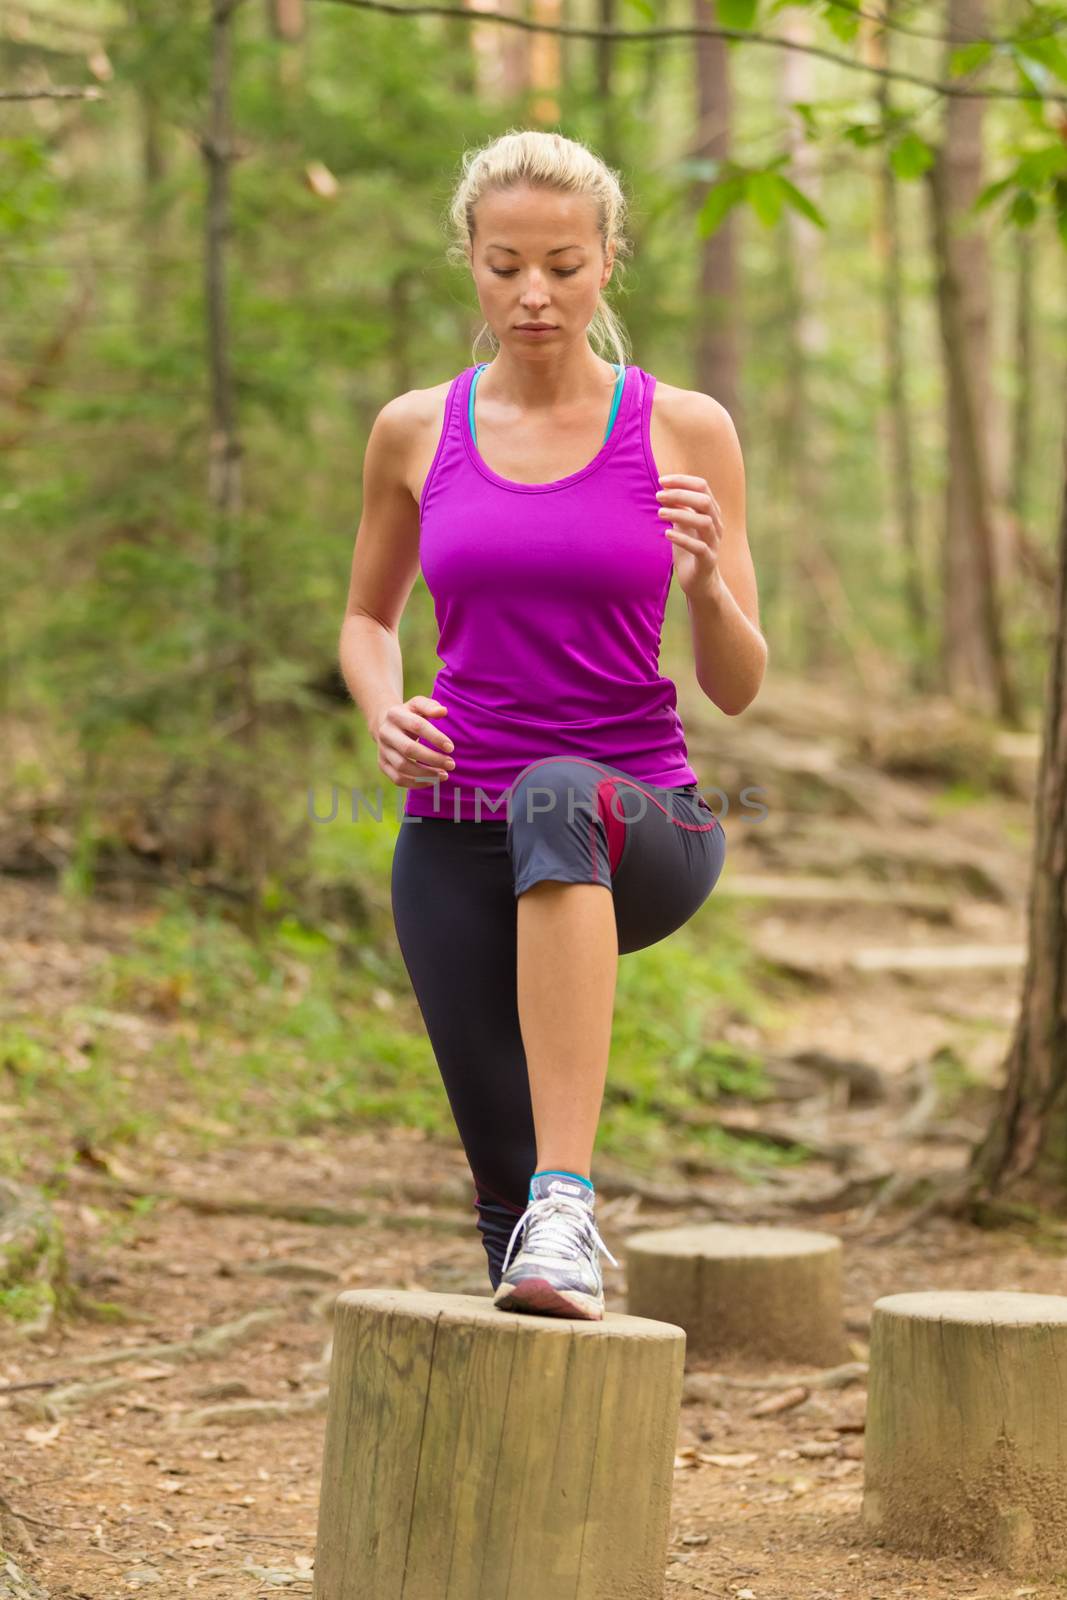 Young spotry woman doing cardio exercises on recreational trail outdoors in the park.